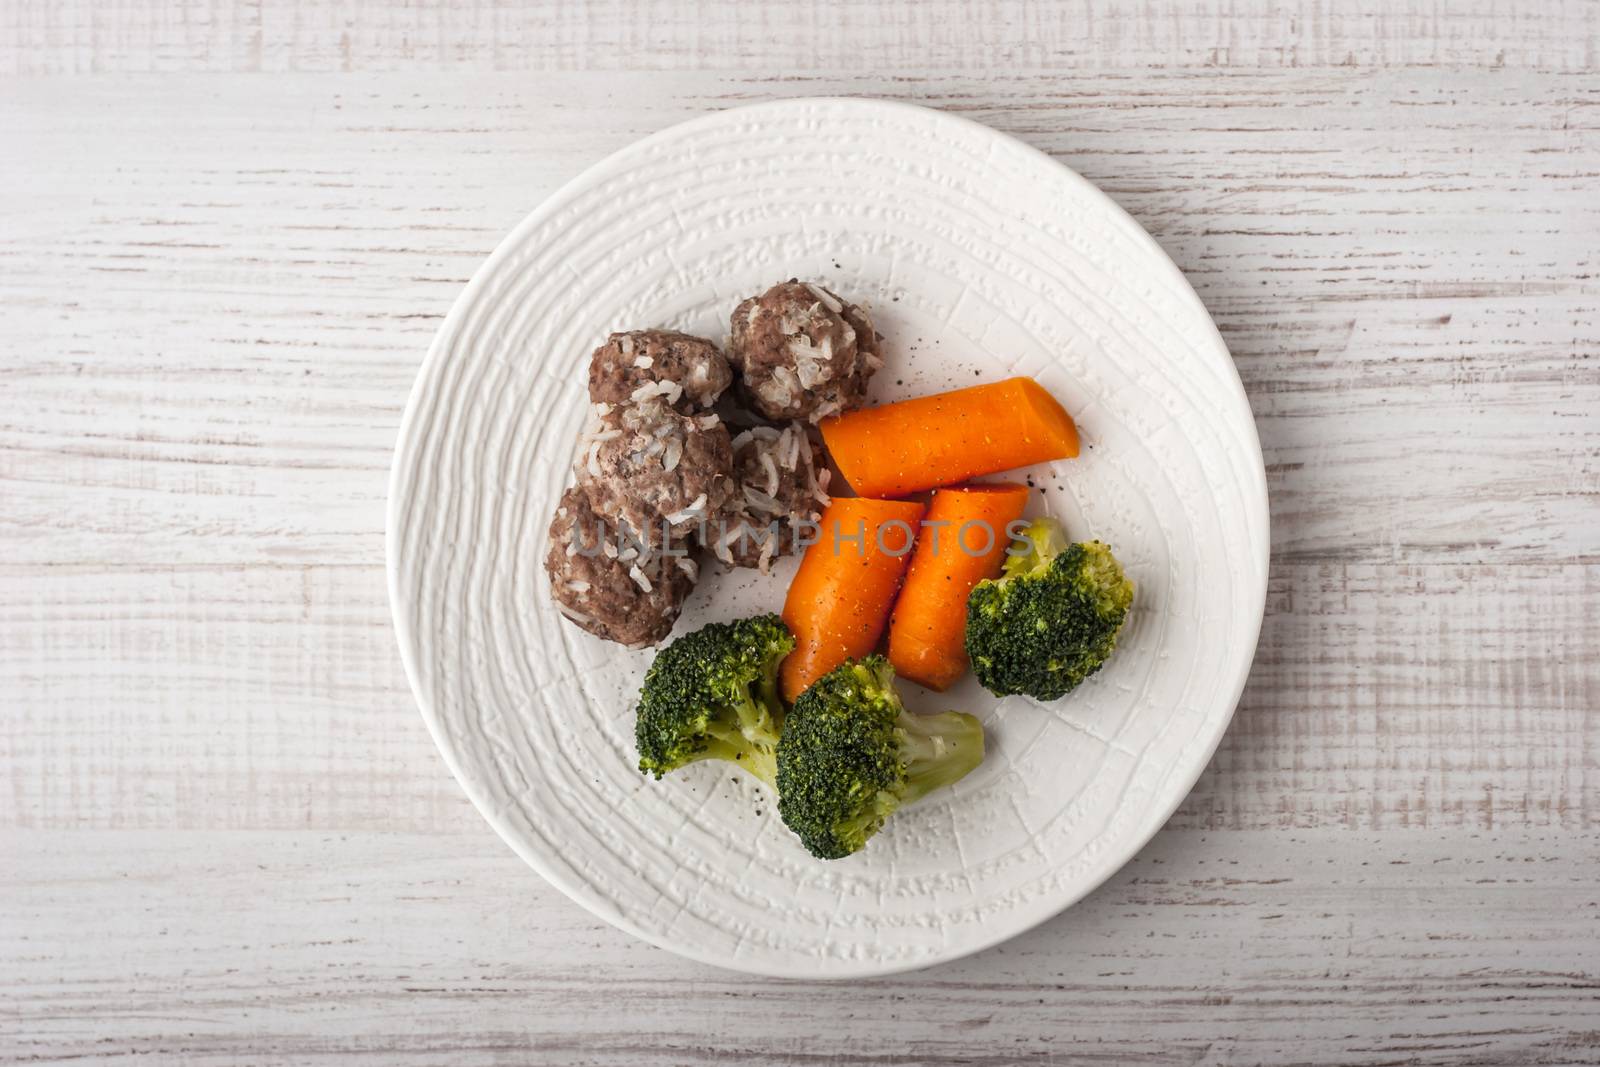 Steamed broccoli and carrots with meatballs on the white plate top view